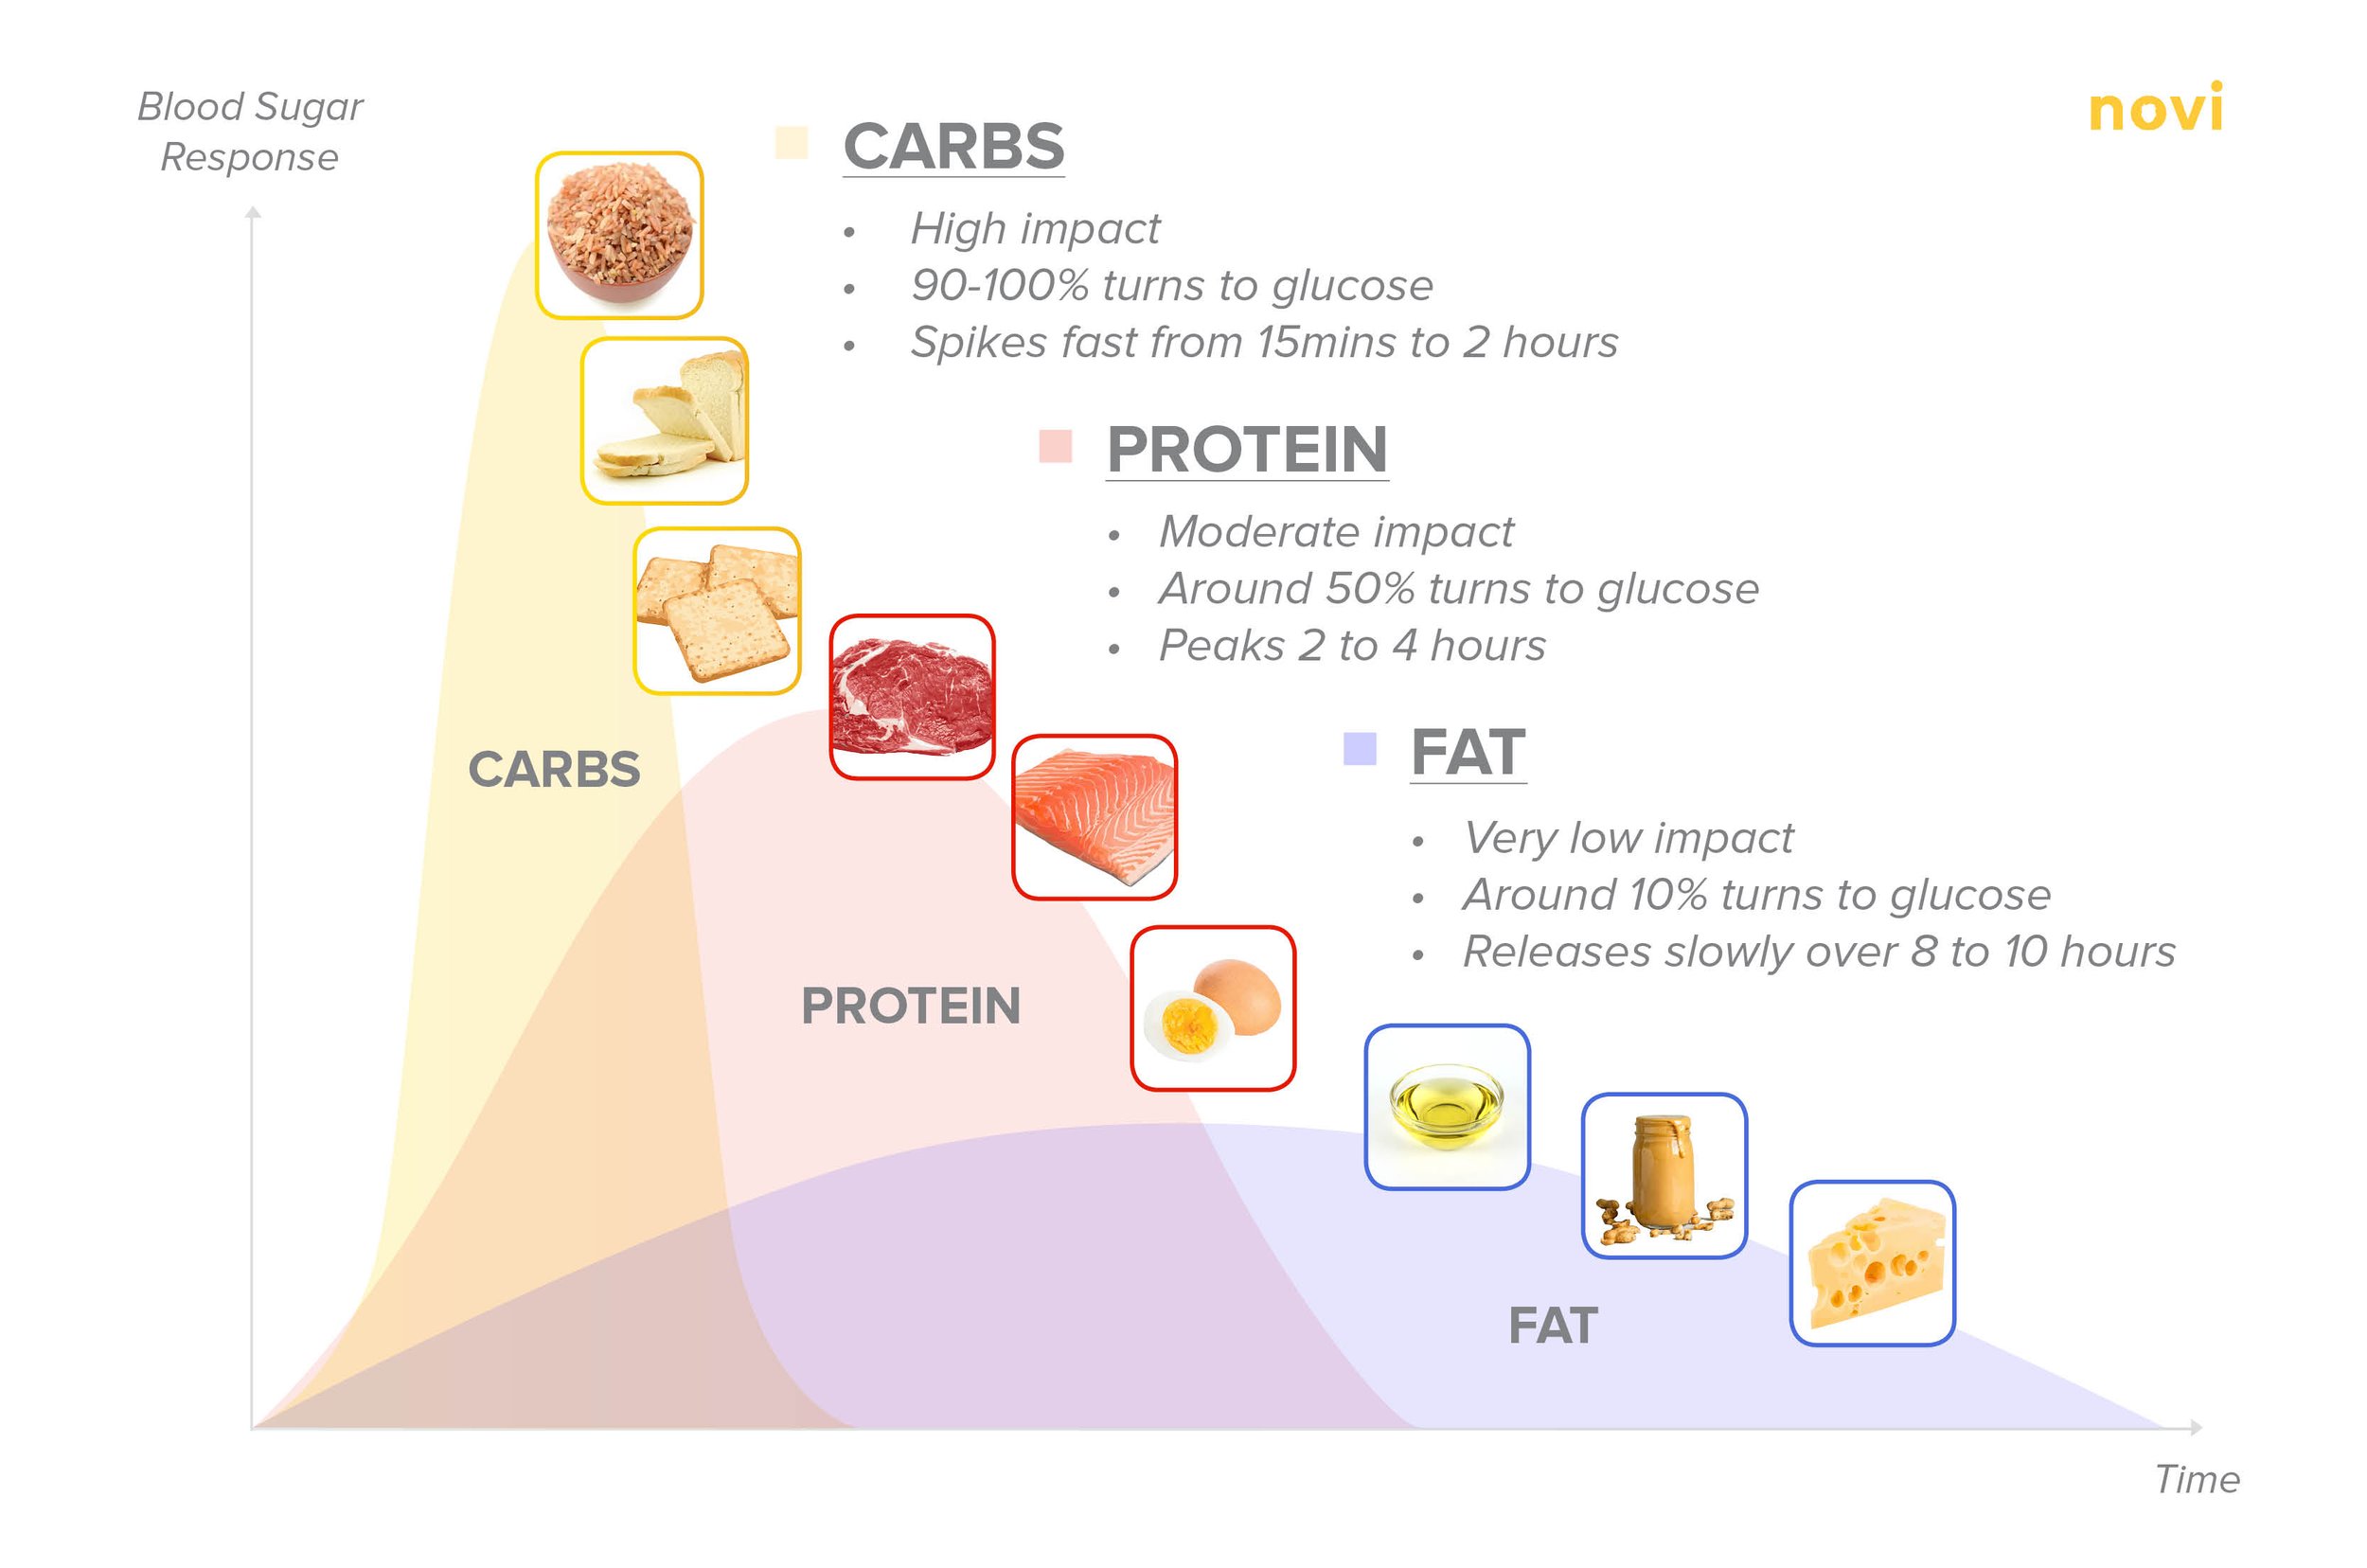 Carbohydrate and blood sugar levels